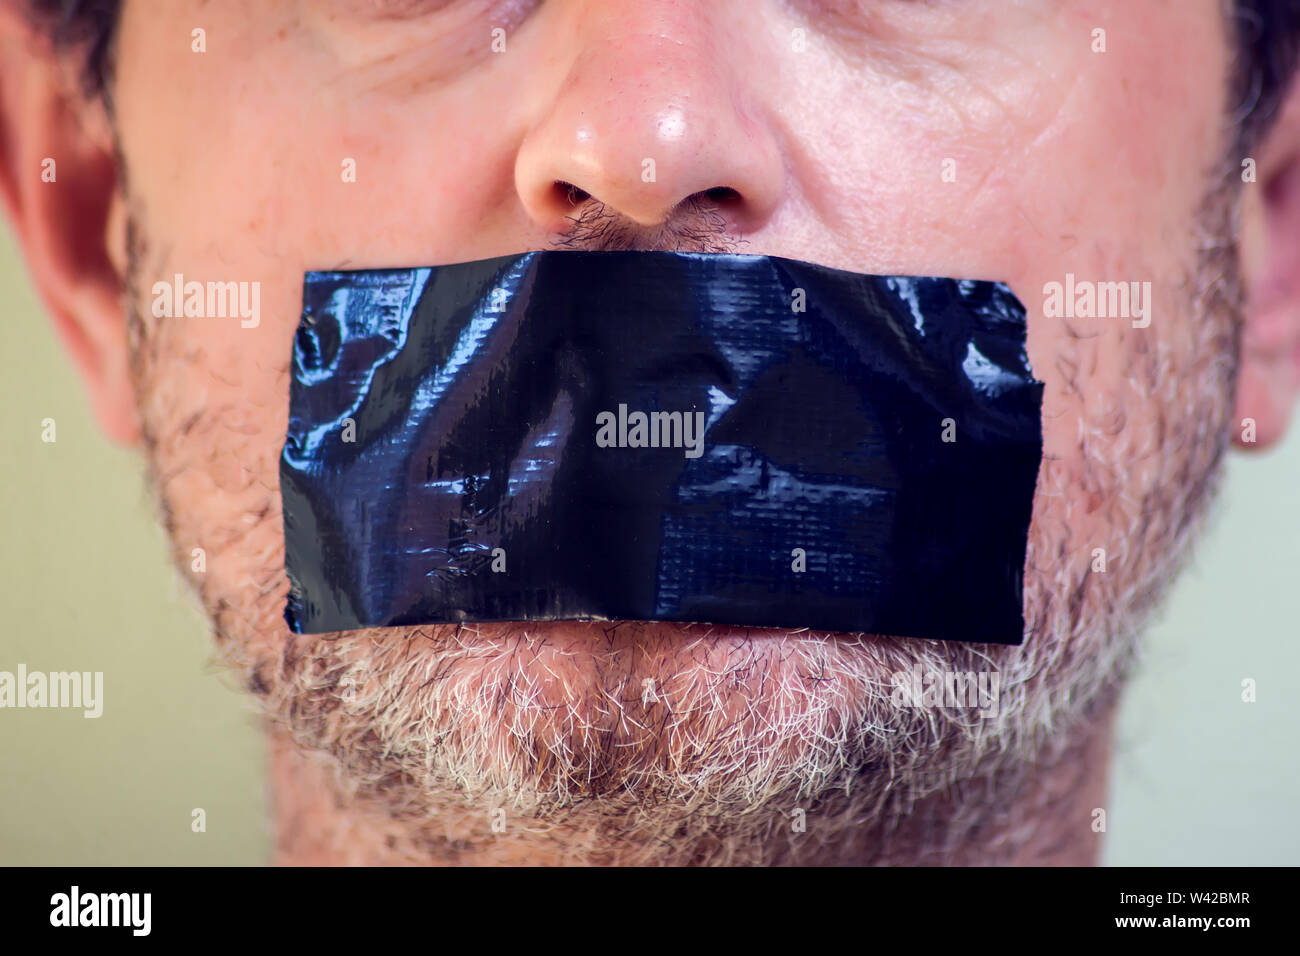 Upset man with self-adhesive tape over her mouth. Stock Photo